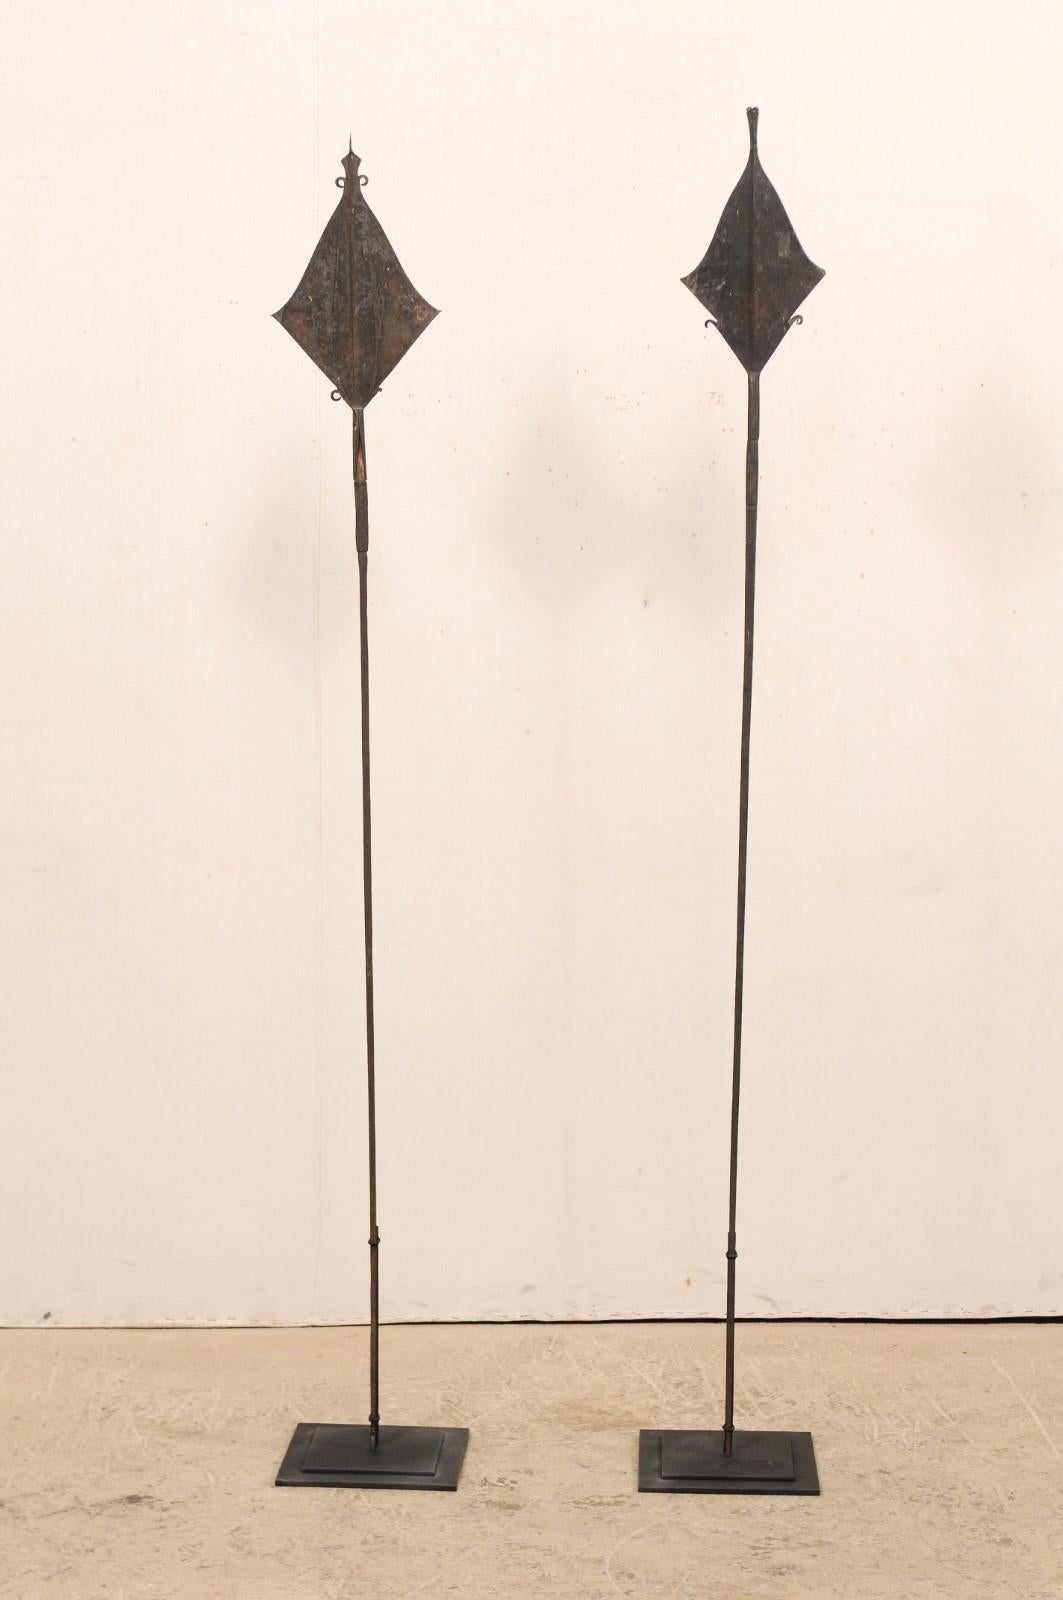 This is a pair of vintage African spear currencies from the Mbole peoples, Democratic Republic of Congo which are nicely presented upon custom metal stands. These African currencies take their name from their spear-shaped tip design, though due to